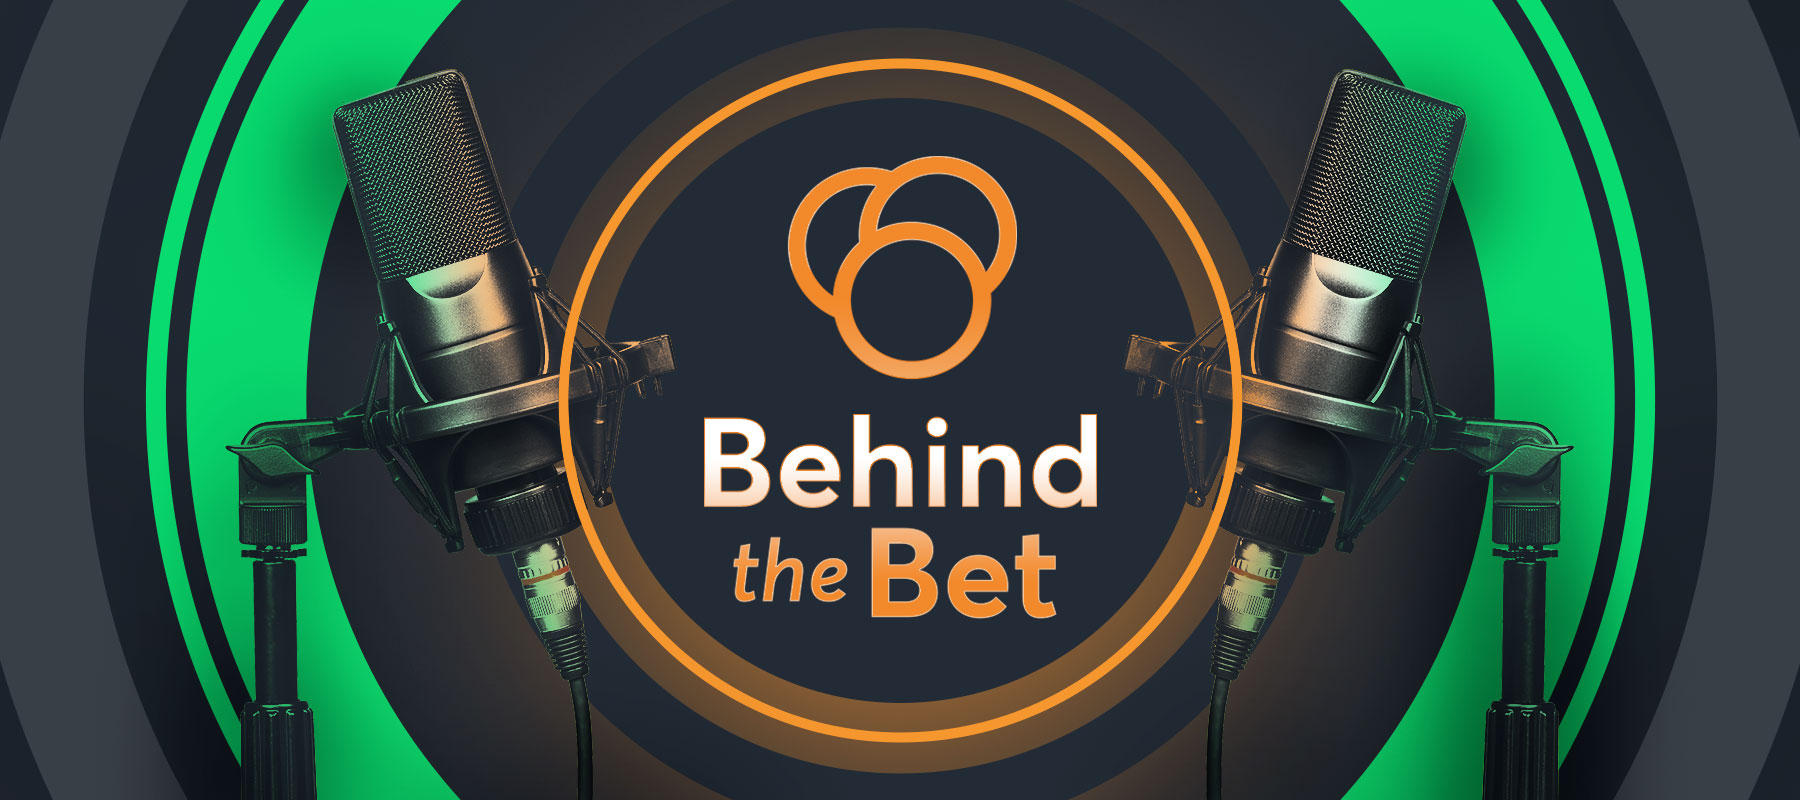 Behind the Bet - Join the conversation